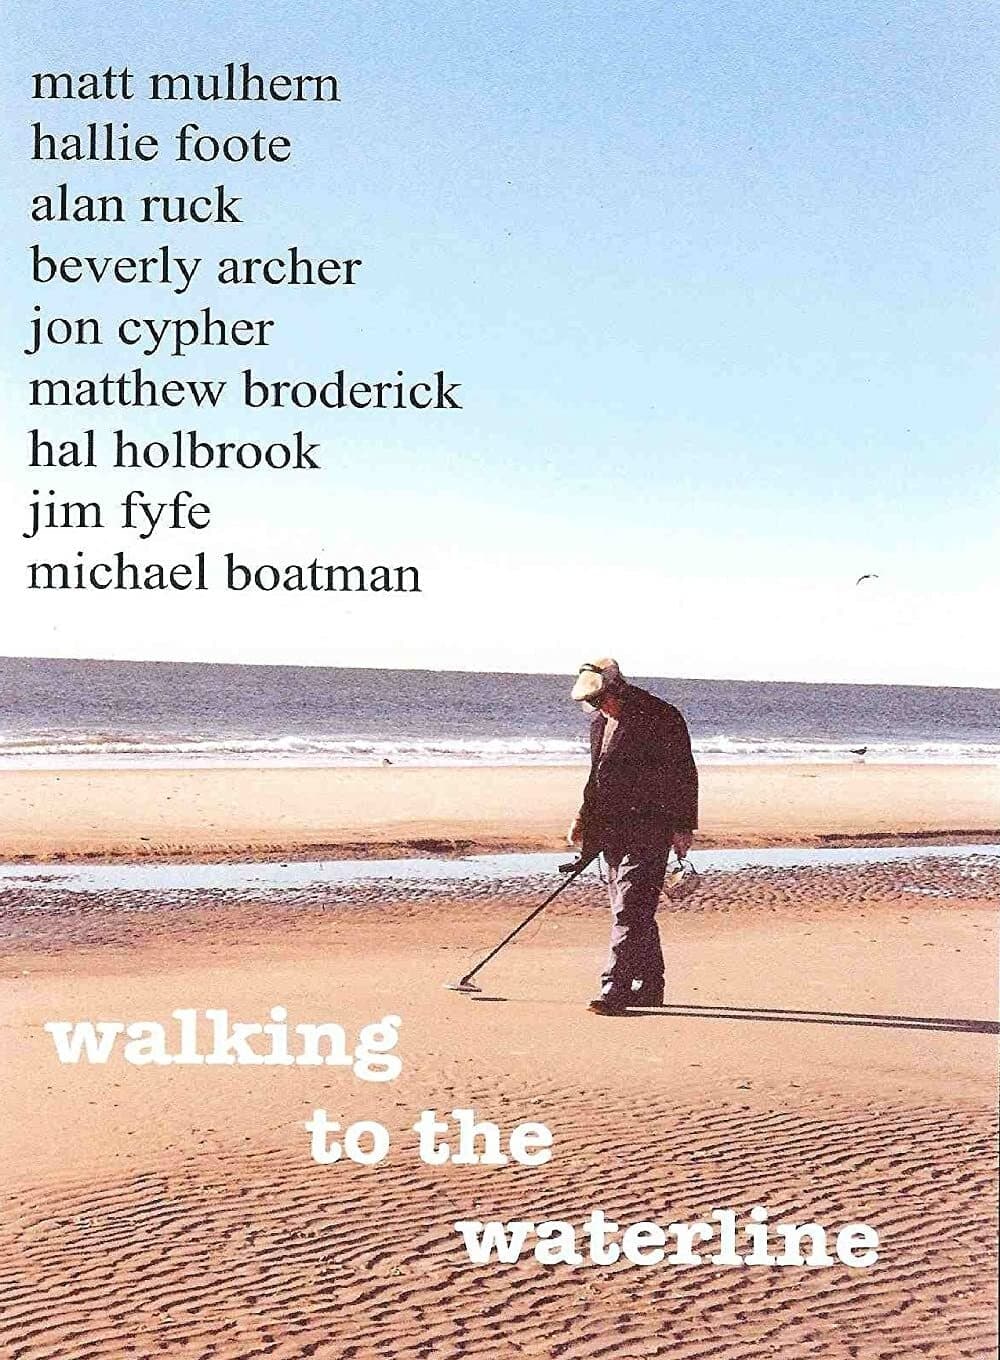 Walking to the Waterline (1998)